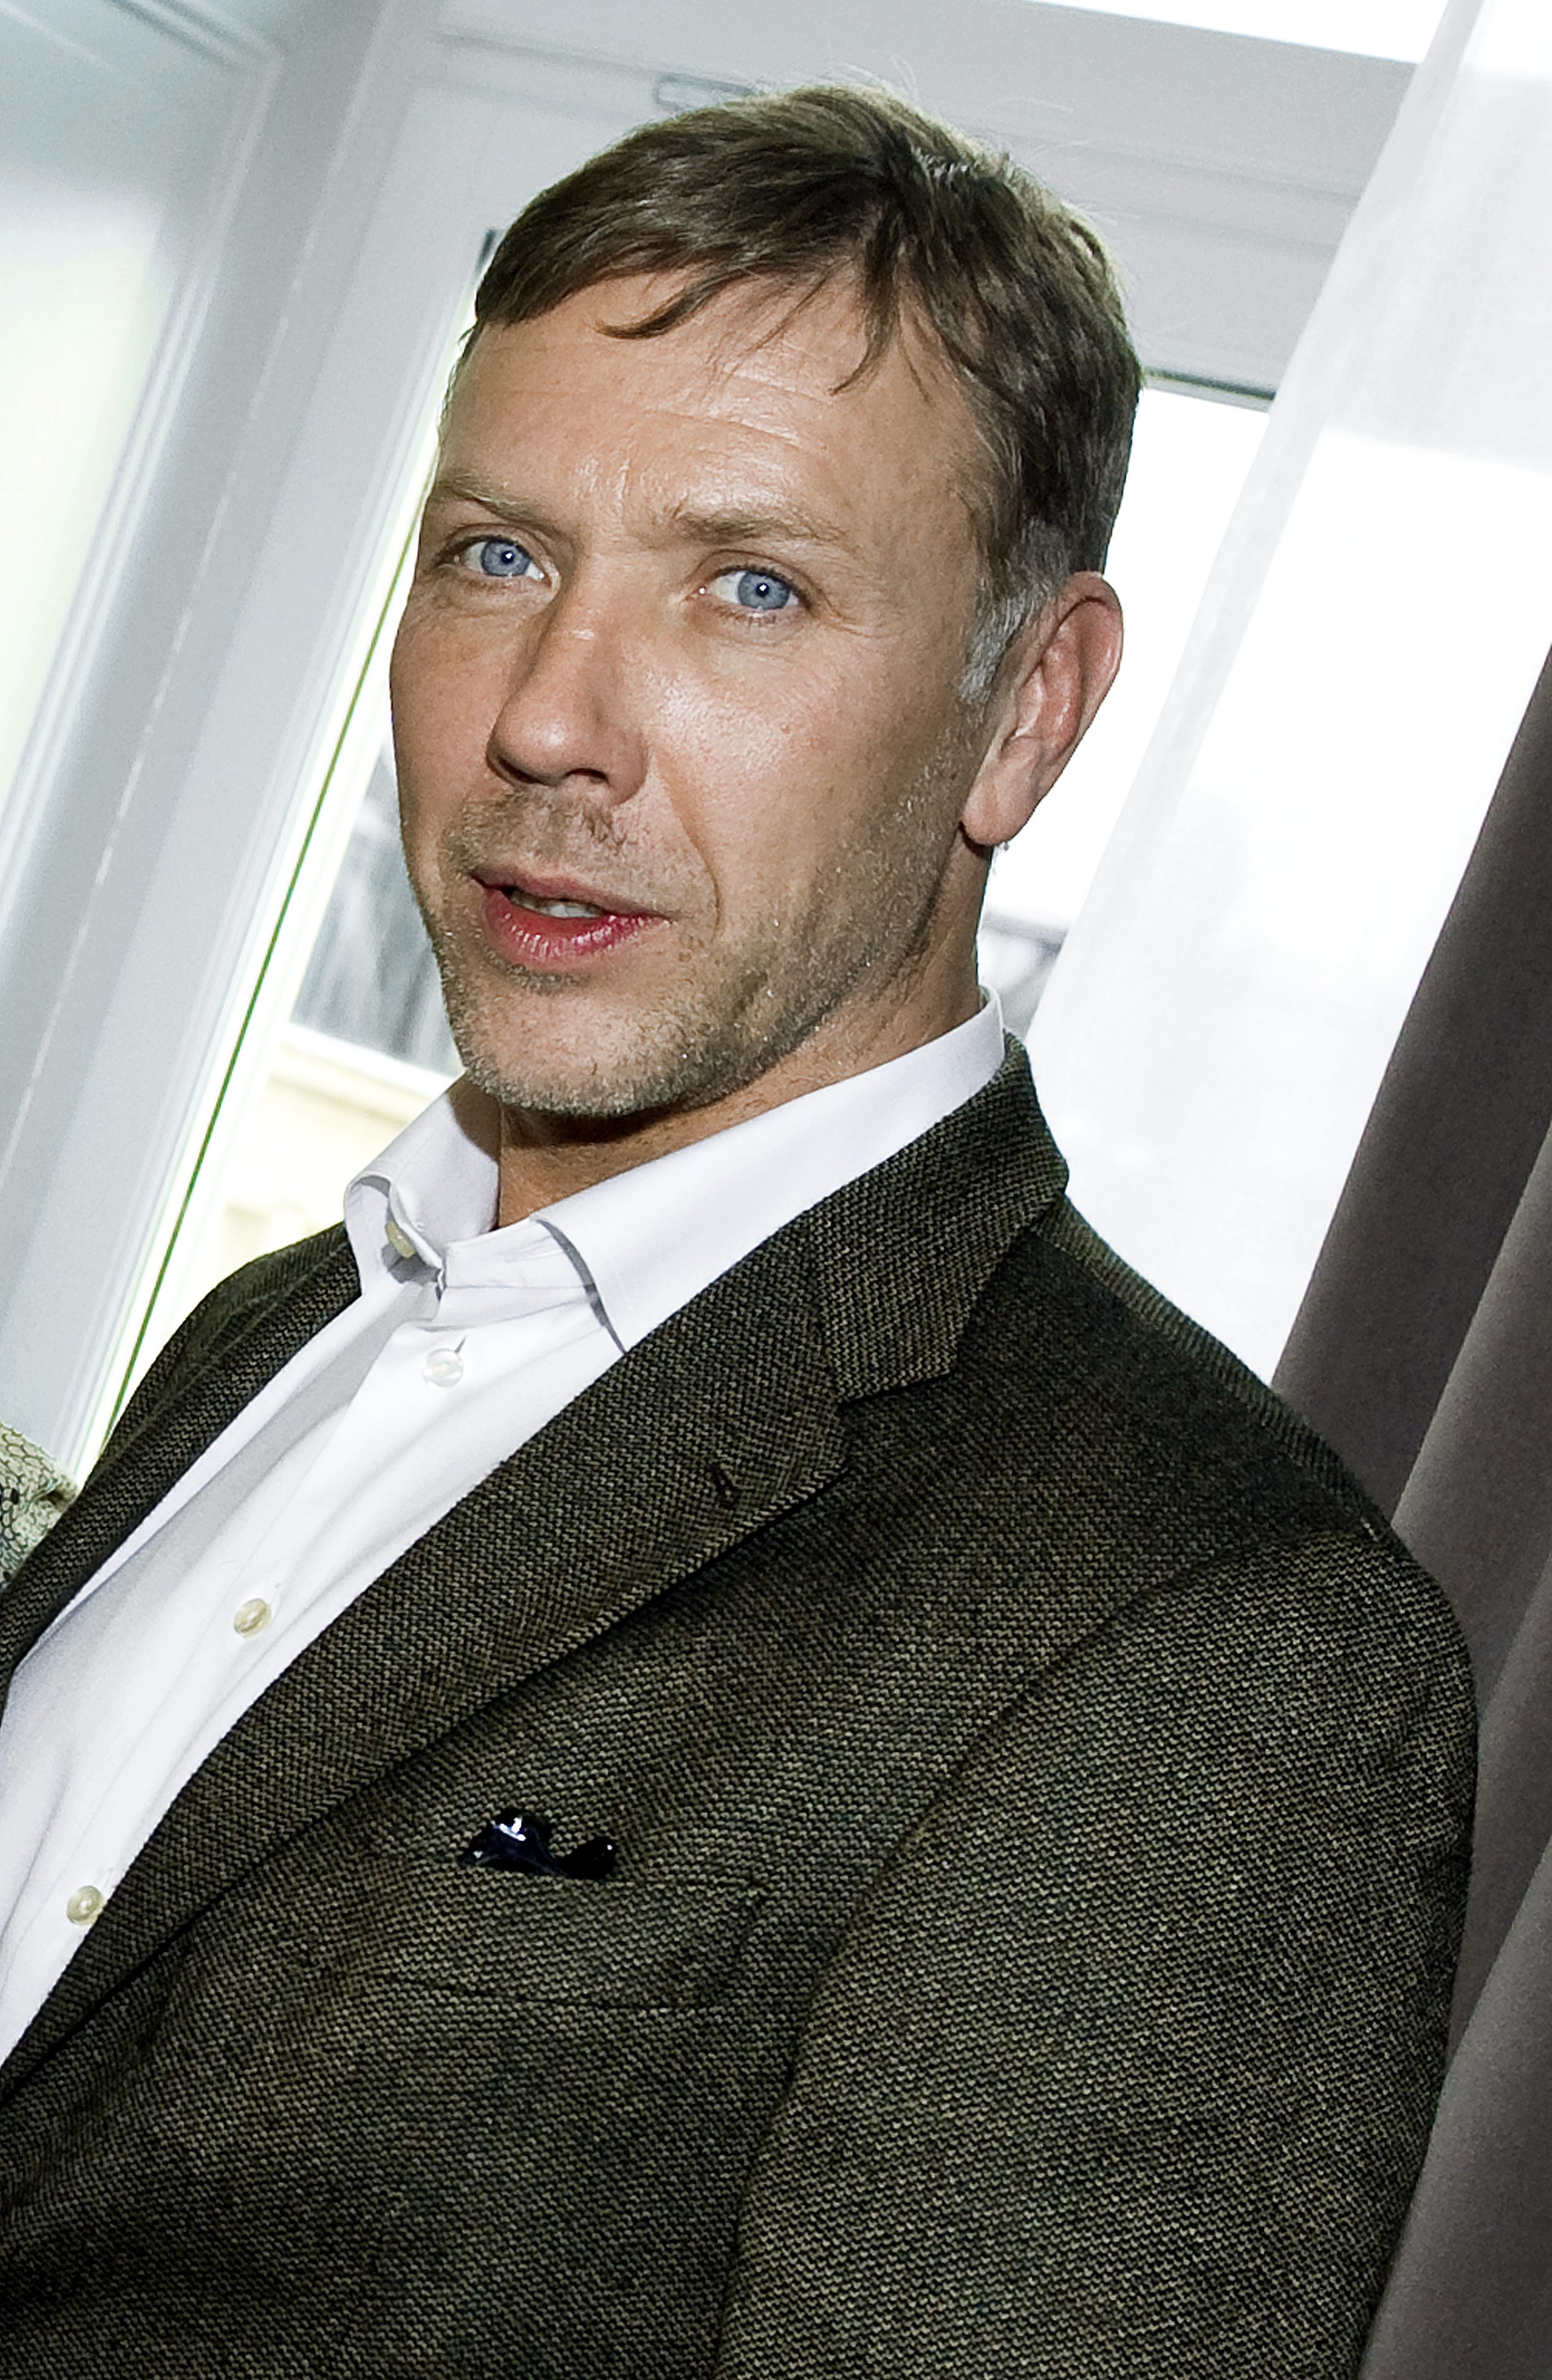 Film, Ola Rapace, Hollywood, Fight, Mikael Persbrandt, Slåss